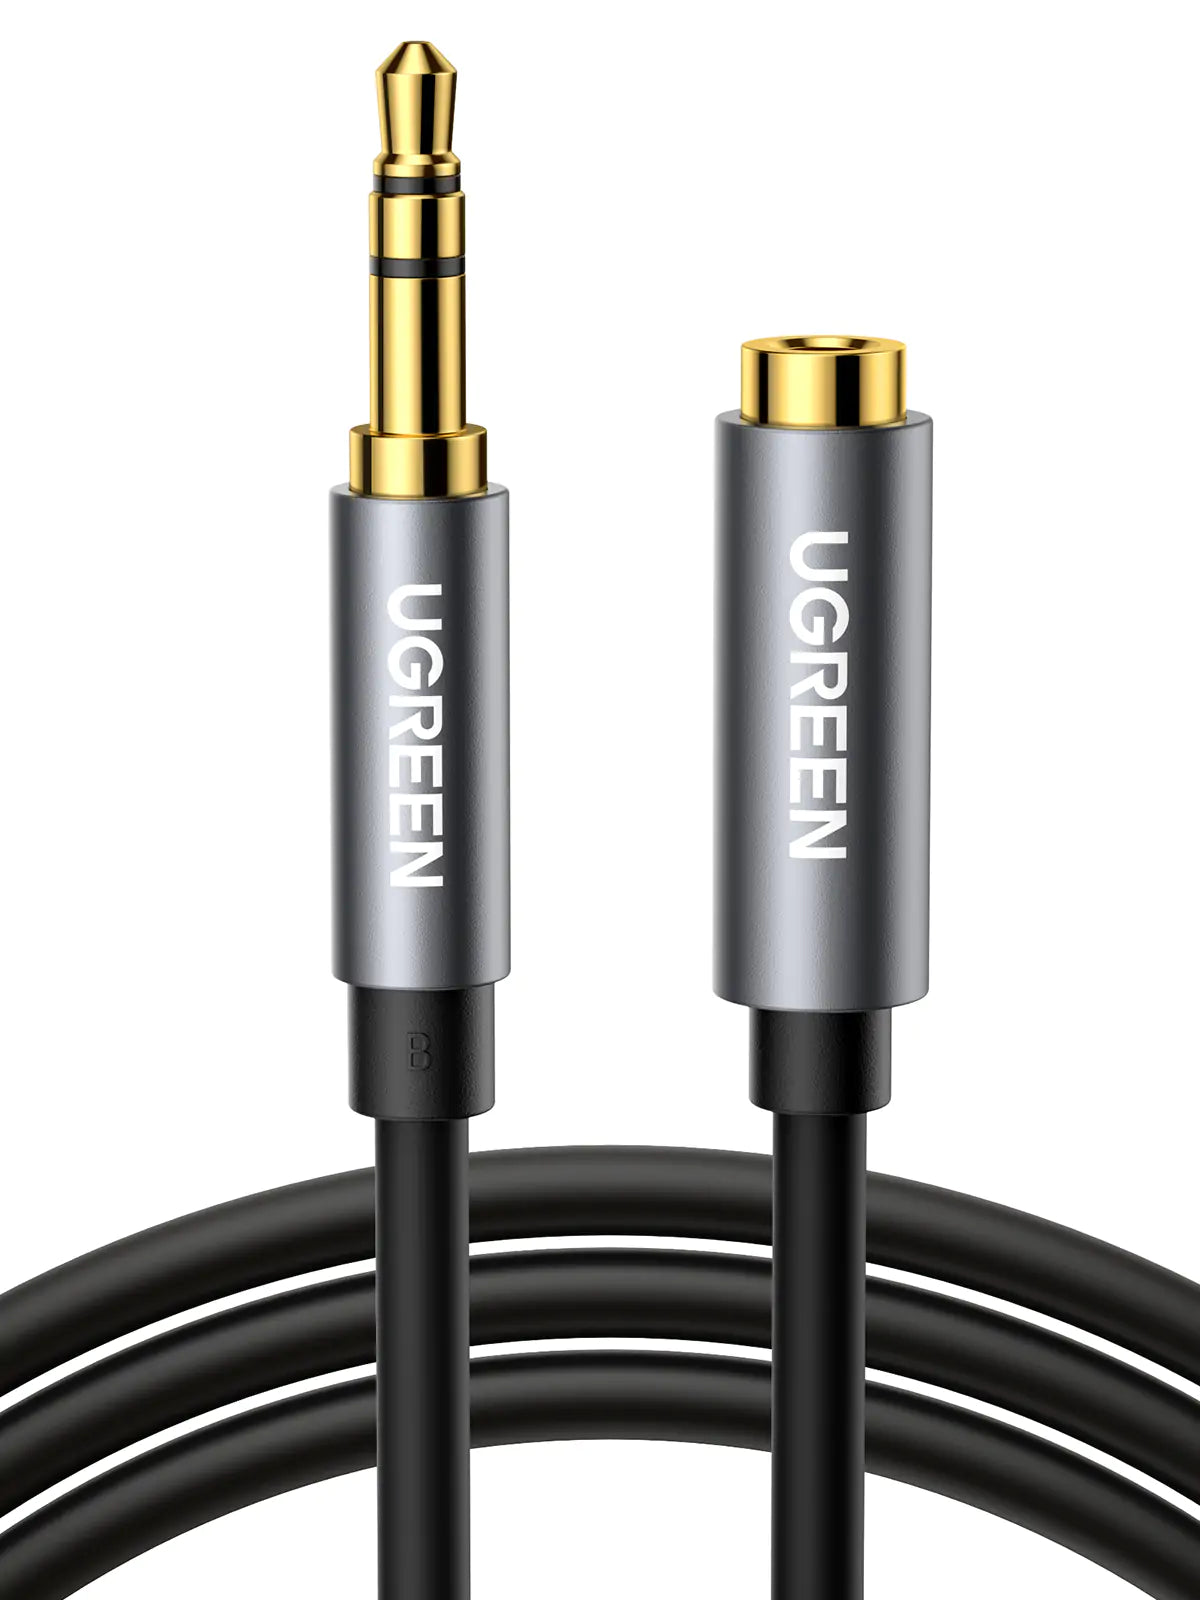 UGREEN 3.5mm Male to 3.5mm Female Extension Cable 2m (Black)